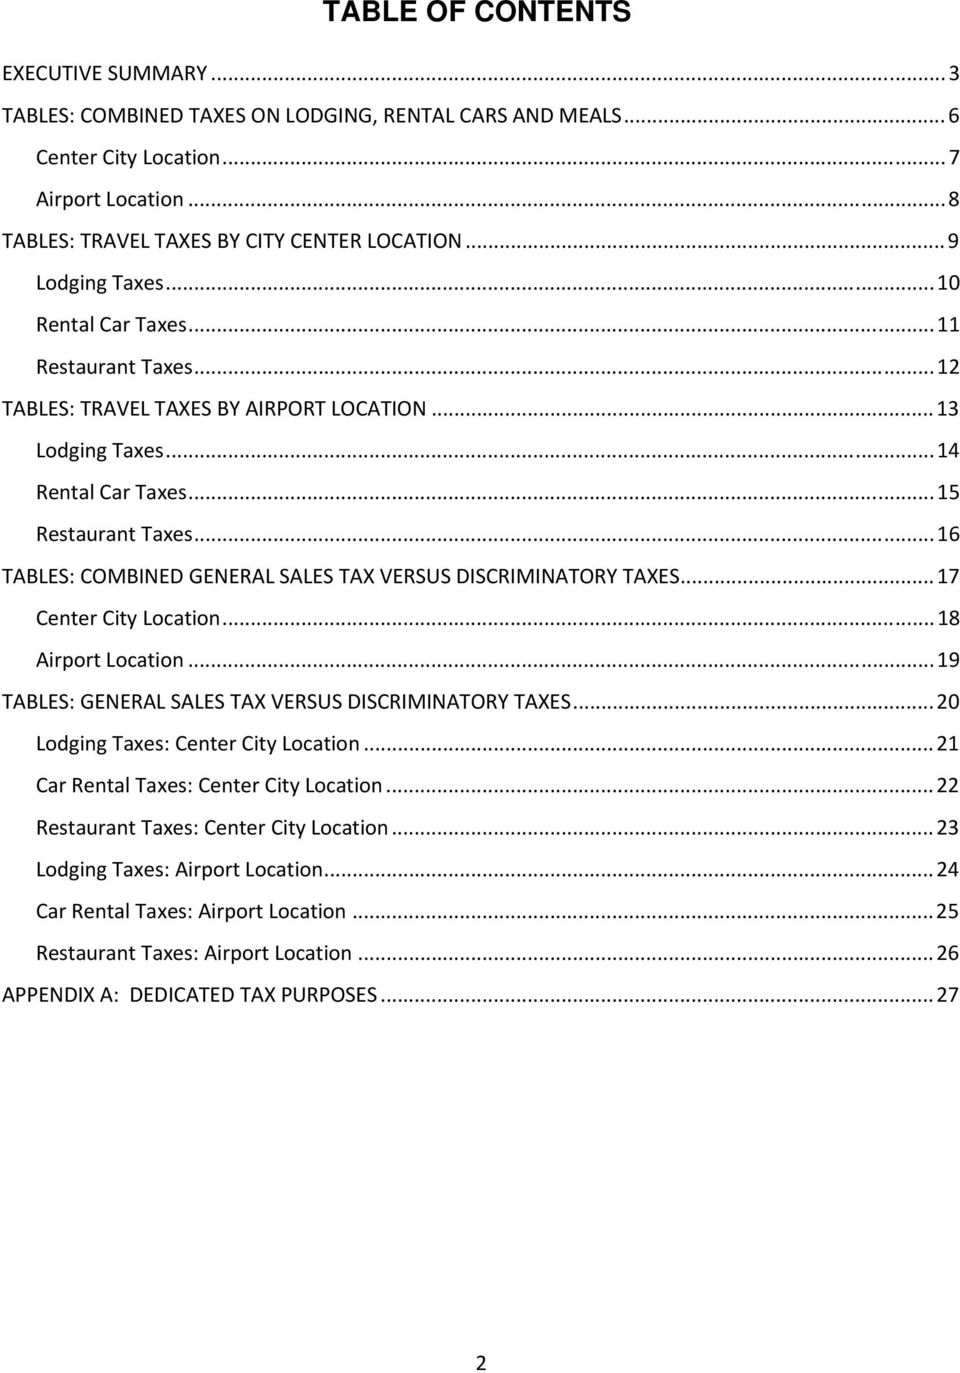 ..16 TABLES: COMBINED GENERAL SALES TAX VERSUS DISCRIMINATORY TAXES...17 Center City Location...18 Airport Location...19 TABLES: GENERAL SALES TAX VERSUS DISCRIMINATORY TAXES.